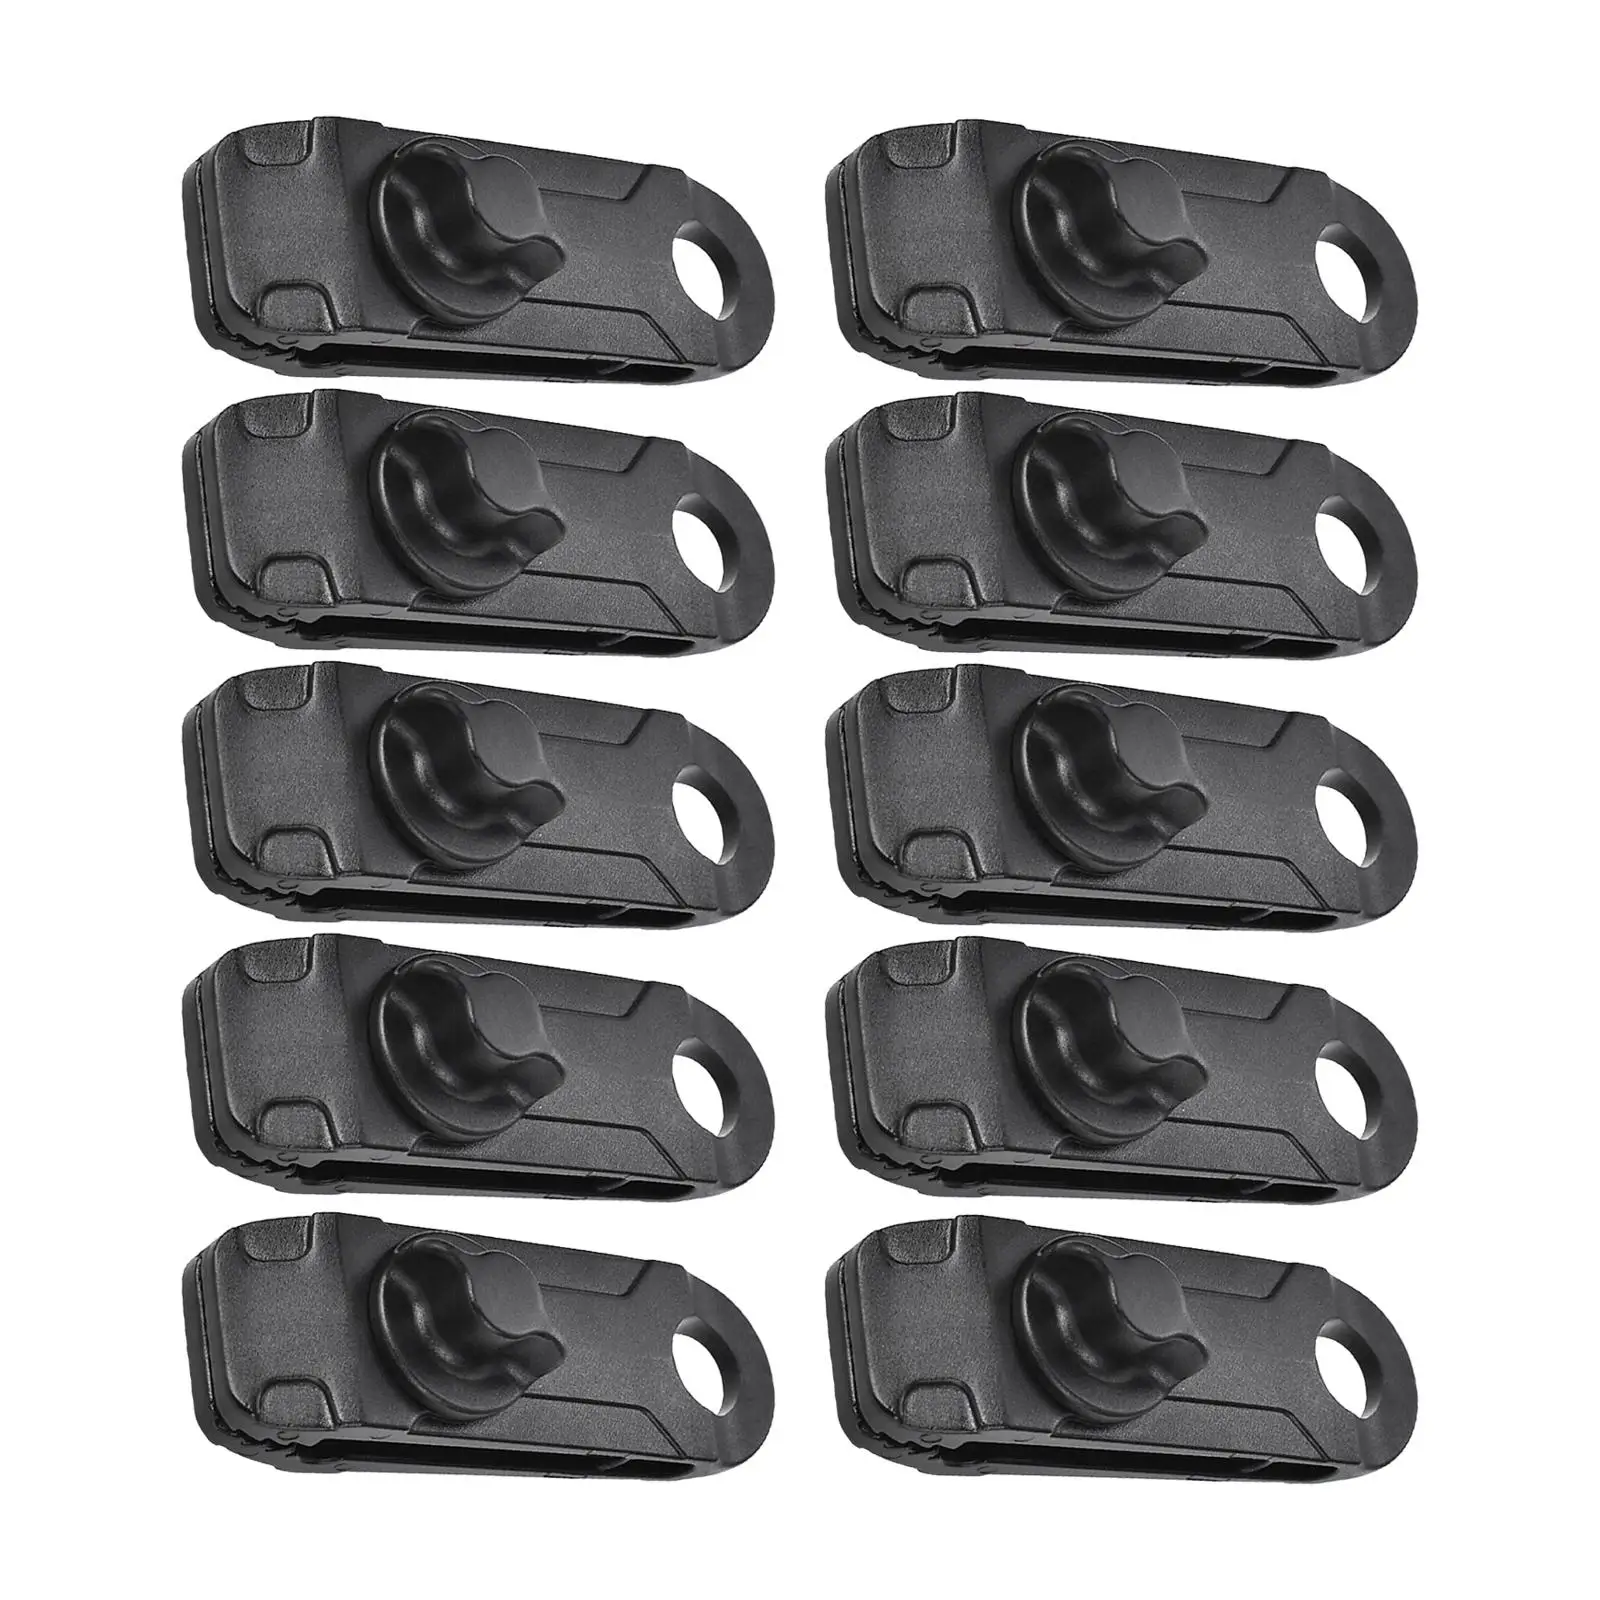 10 Pieces Tent Canopy Cloth Clips Awning Clip Adjustable for Car Covers